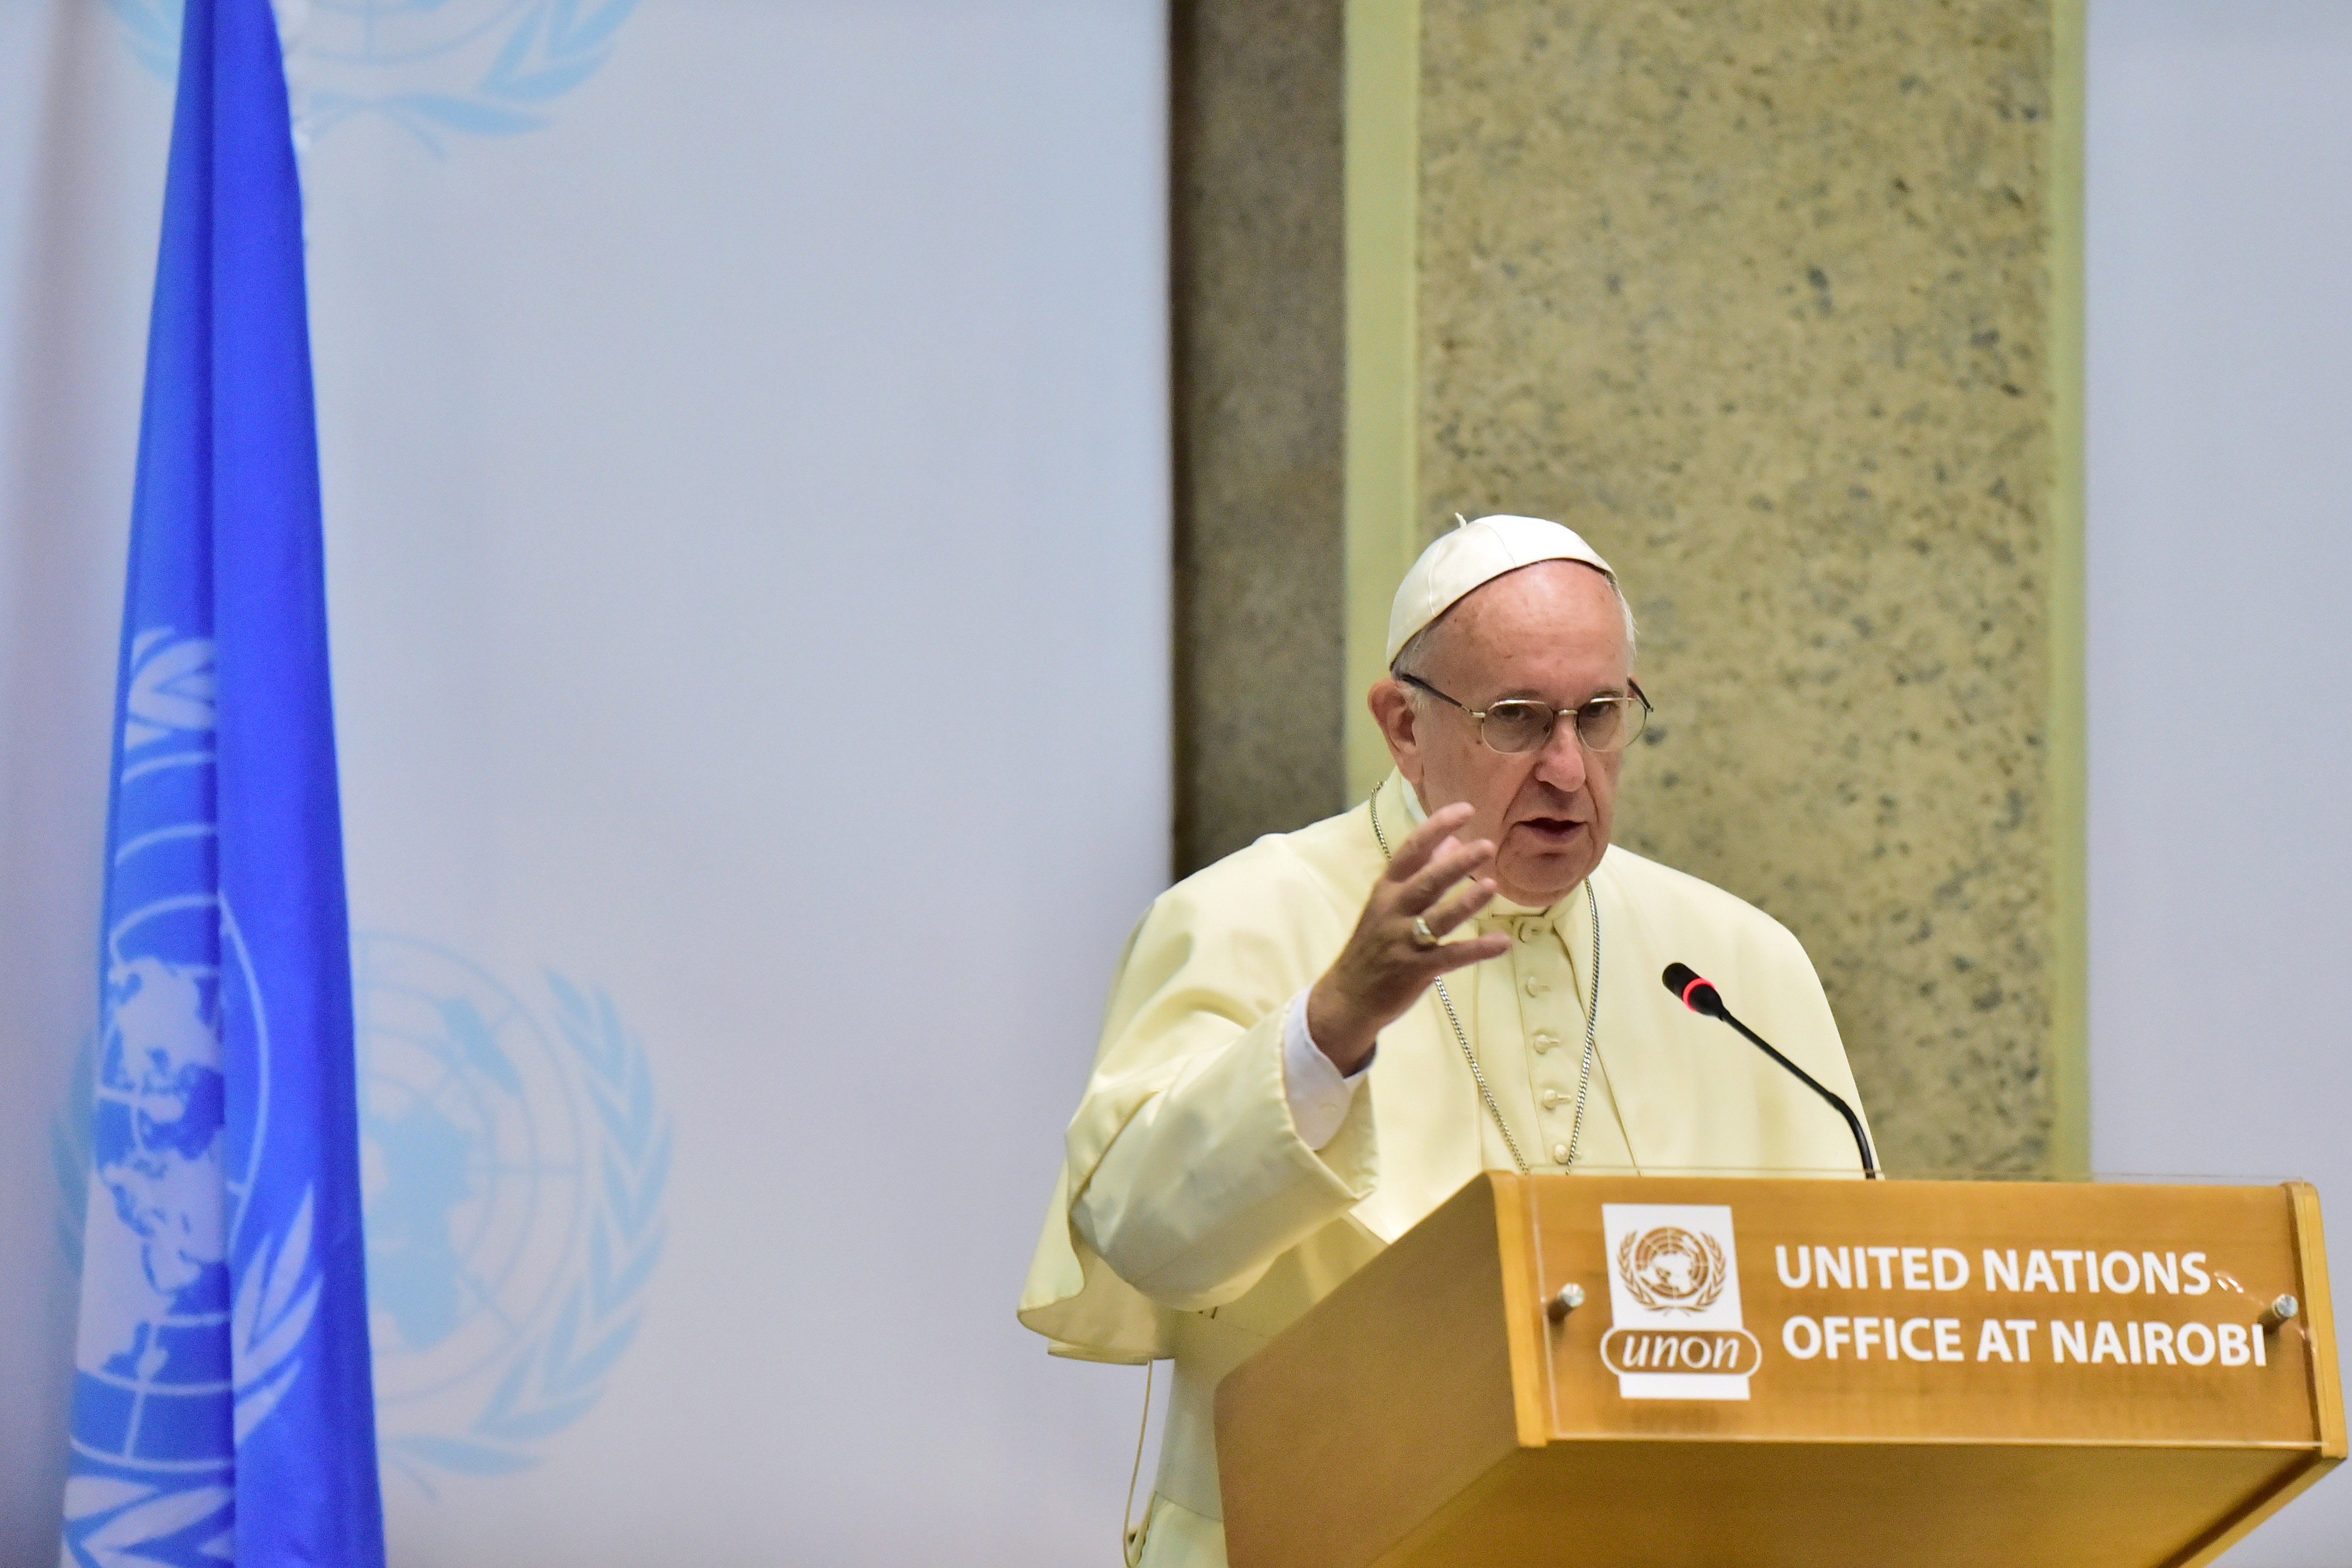 Pope Francis delivers a speech at the United Nations office in Nairobi on November 26, 2015.